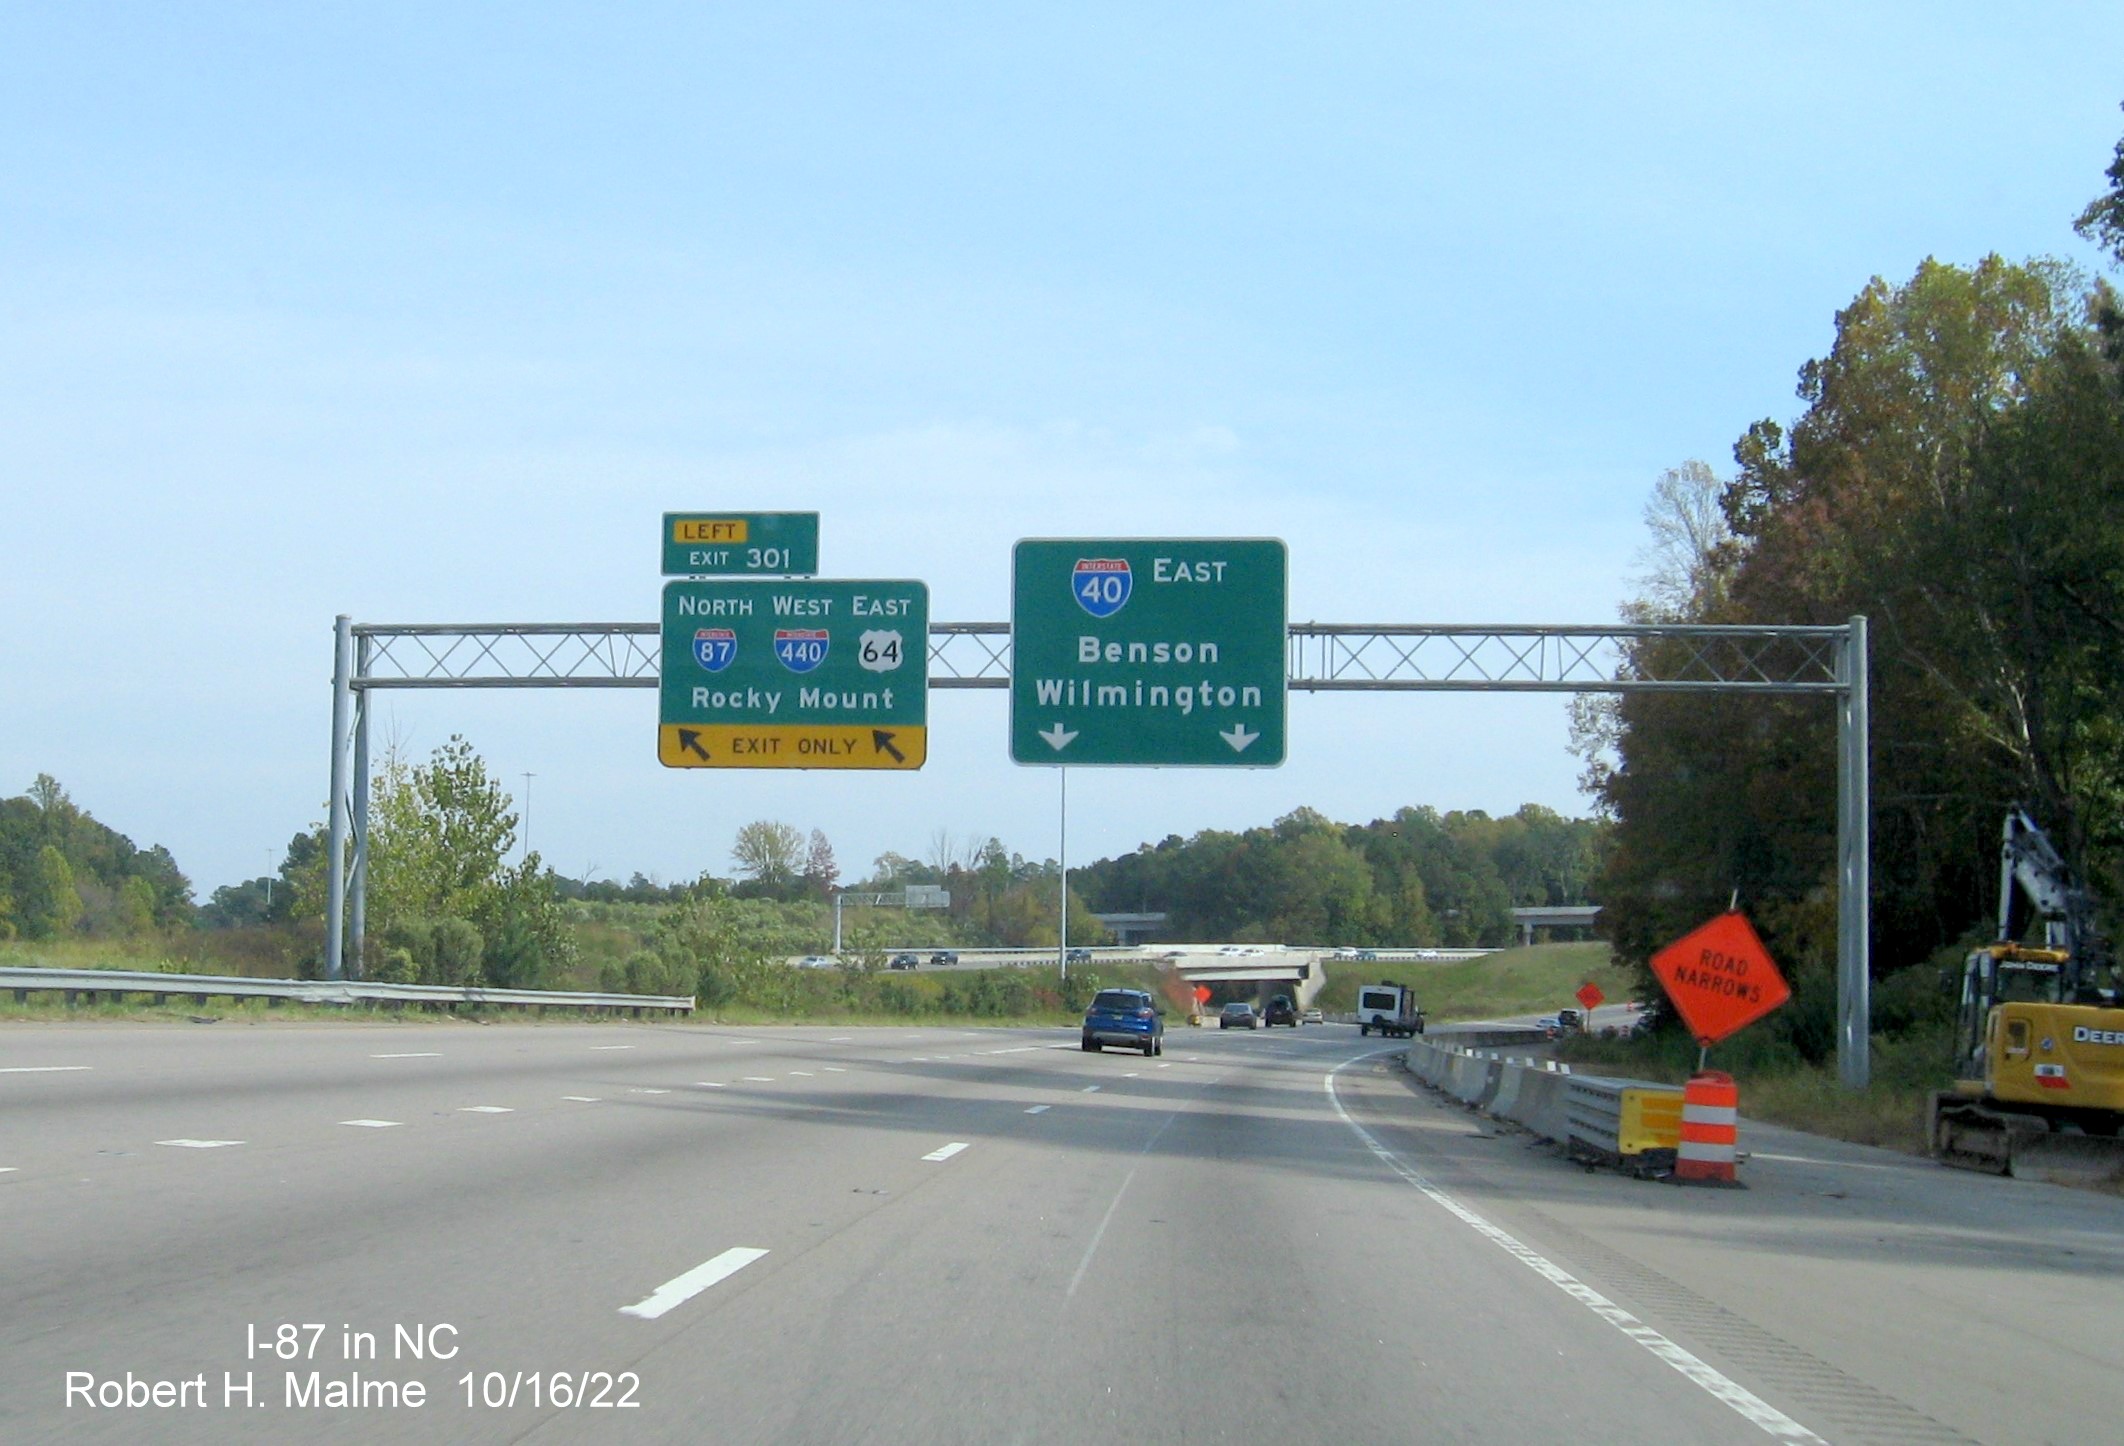 Image of overhead ramp sign for I-87 North/I-440 West/US 64 East on I-40/US 64 East 
                                        in Raleigh, October 2022